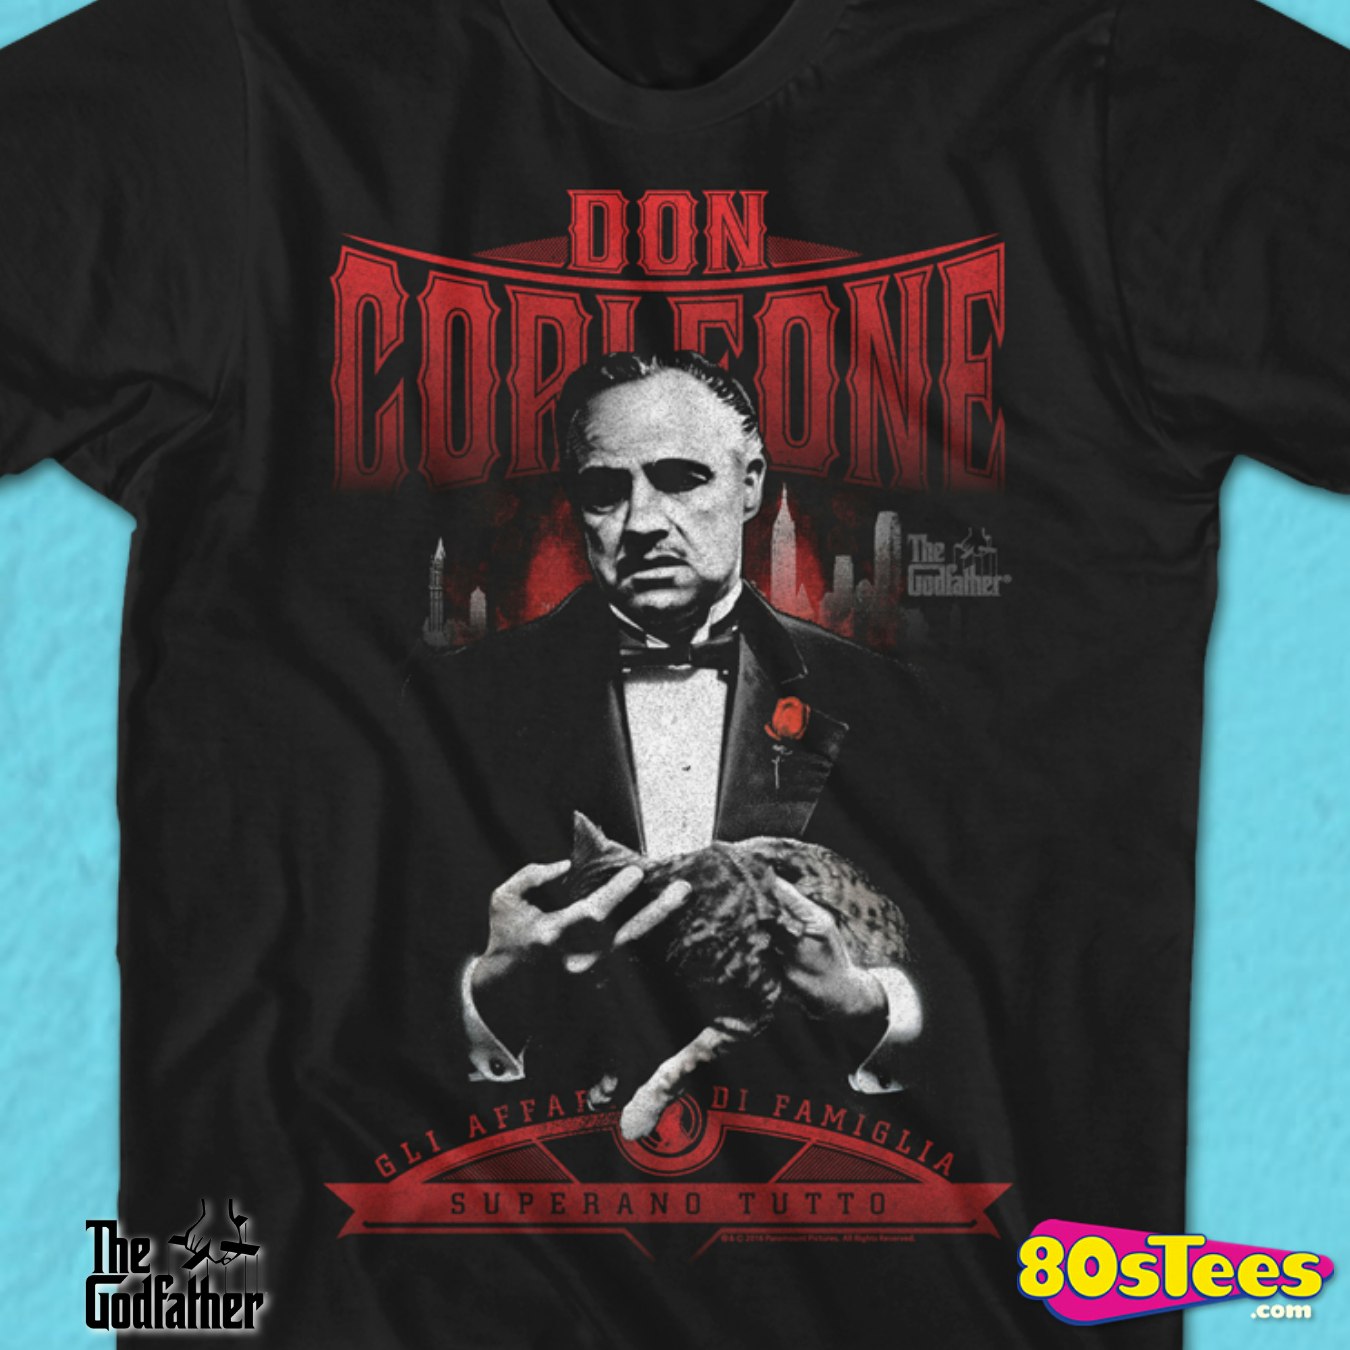 GODFATHER T-shirt Don Corleone Japanese Movie Poster Licensed Mens Tee Black New